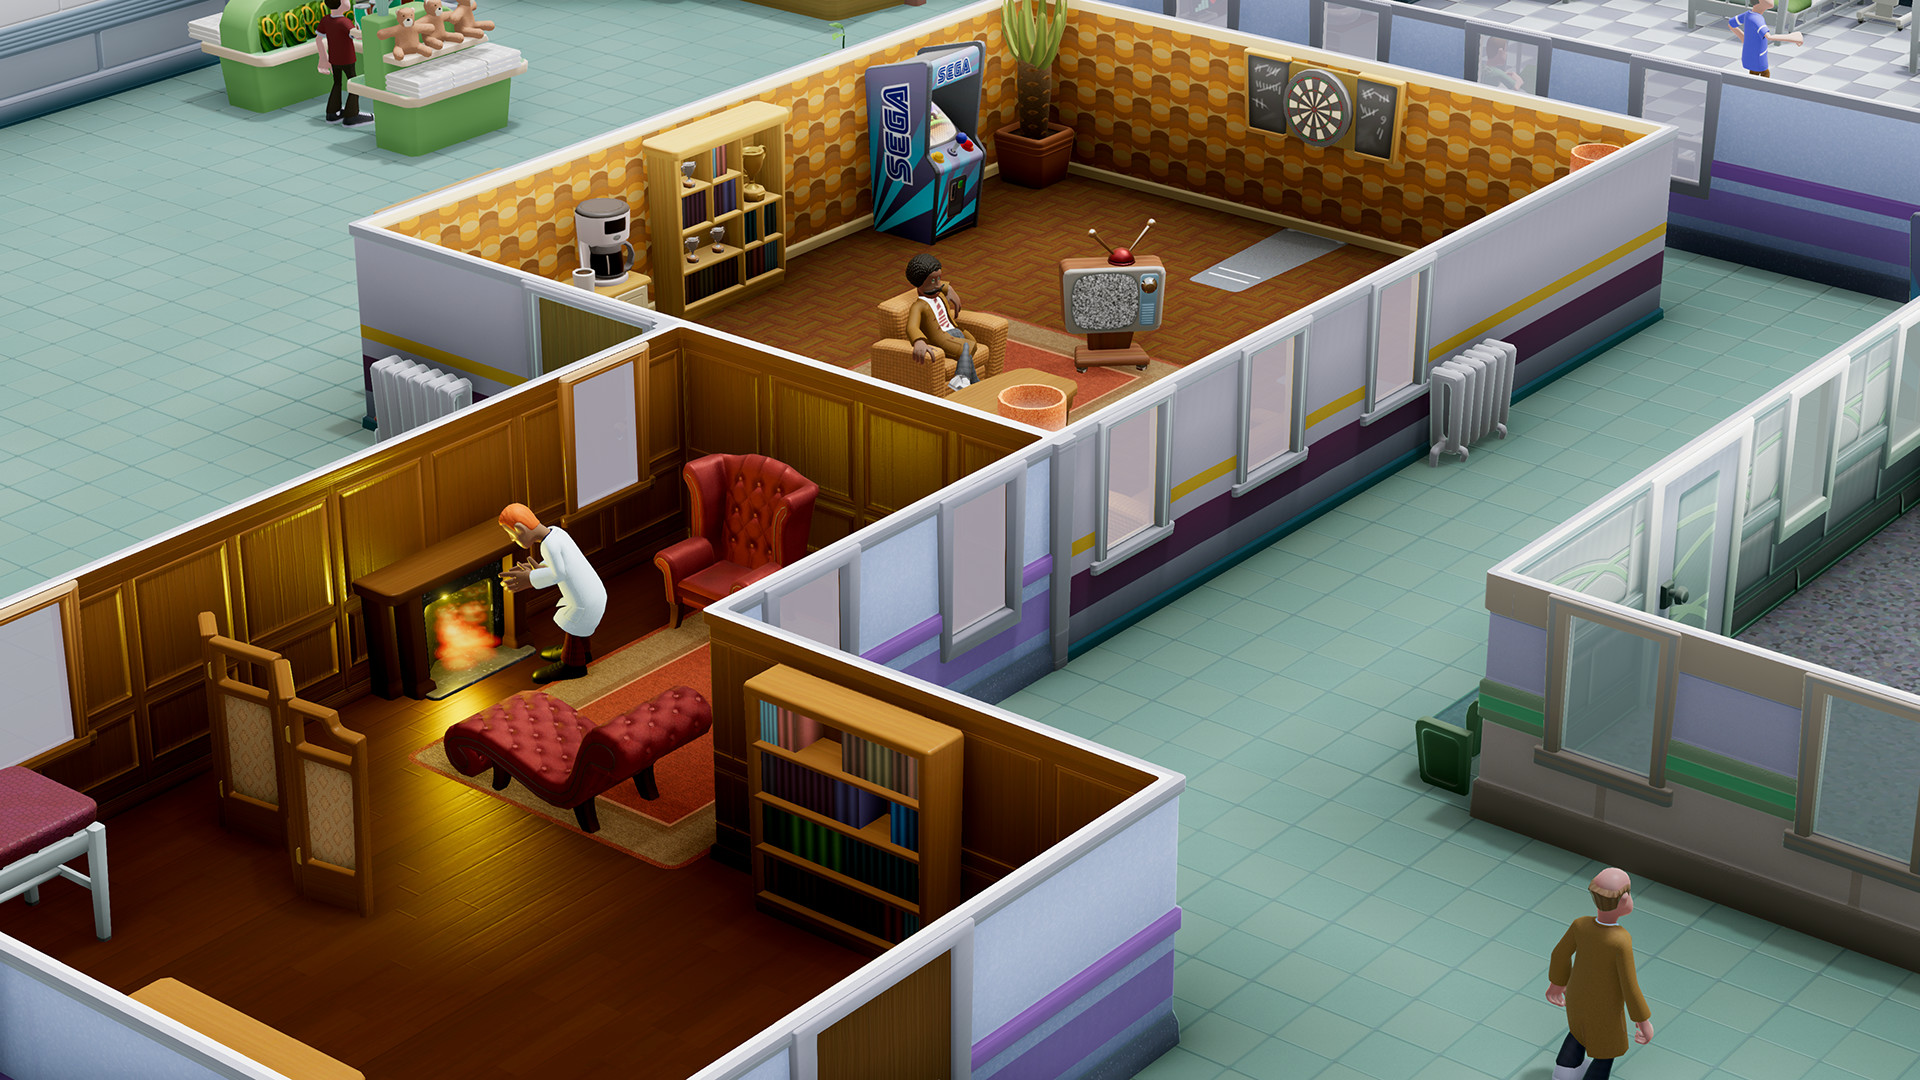 two point hospital demo